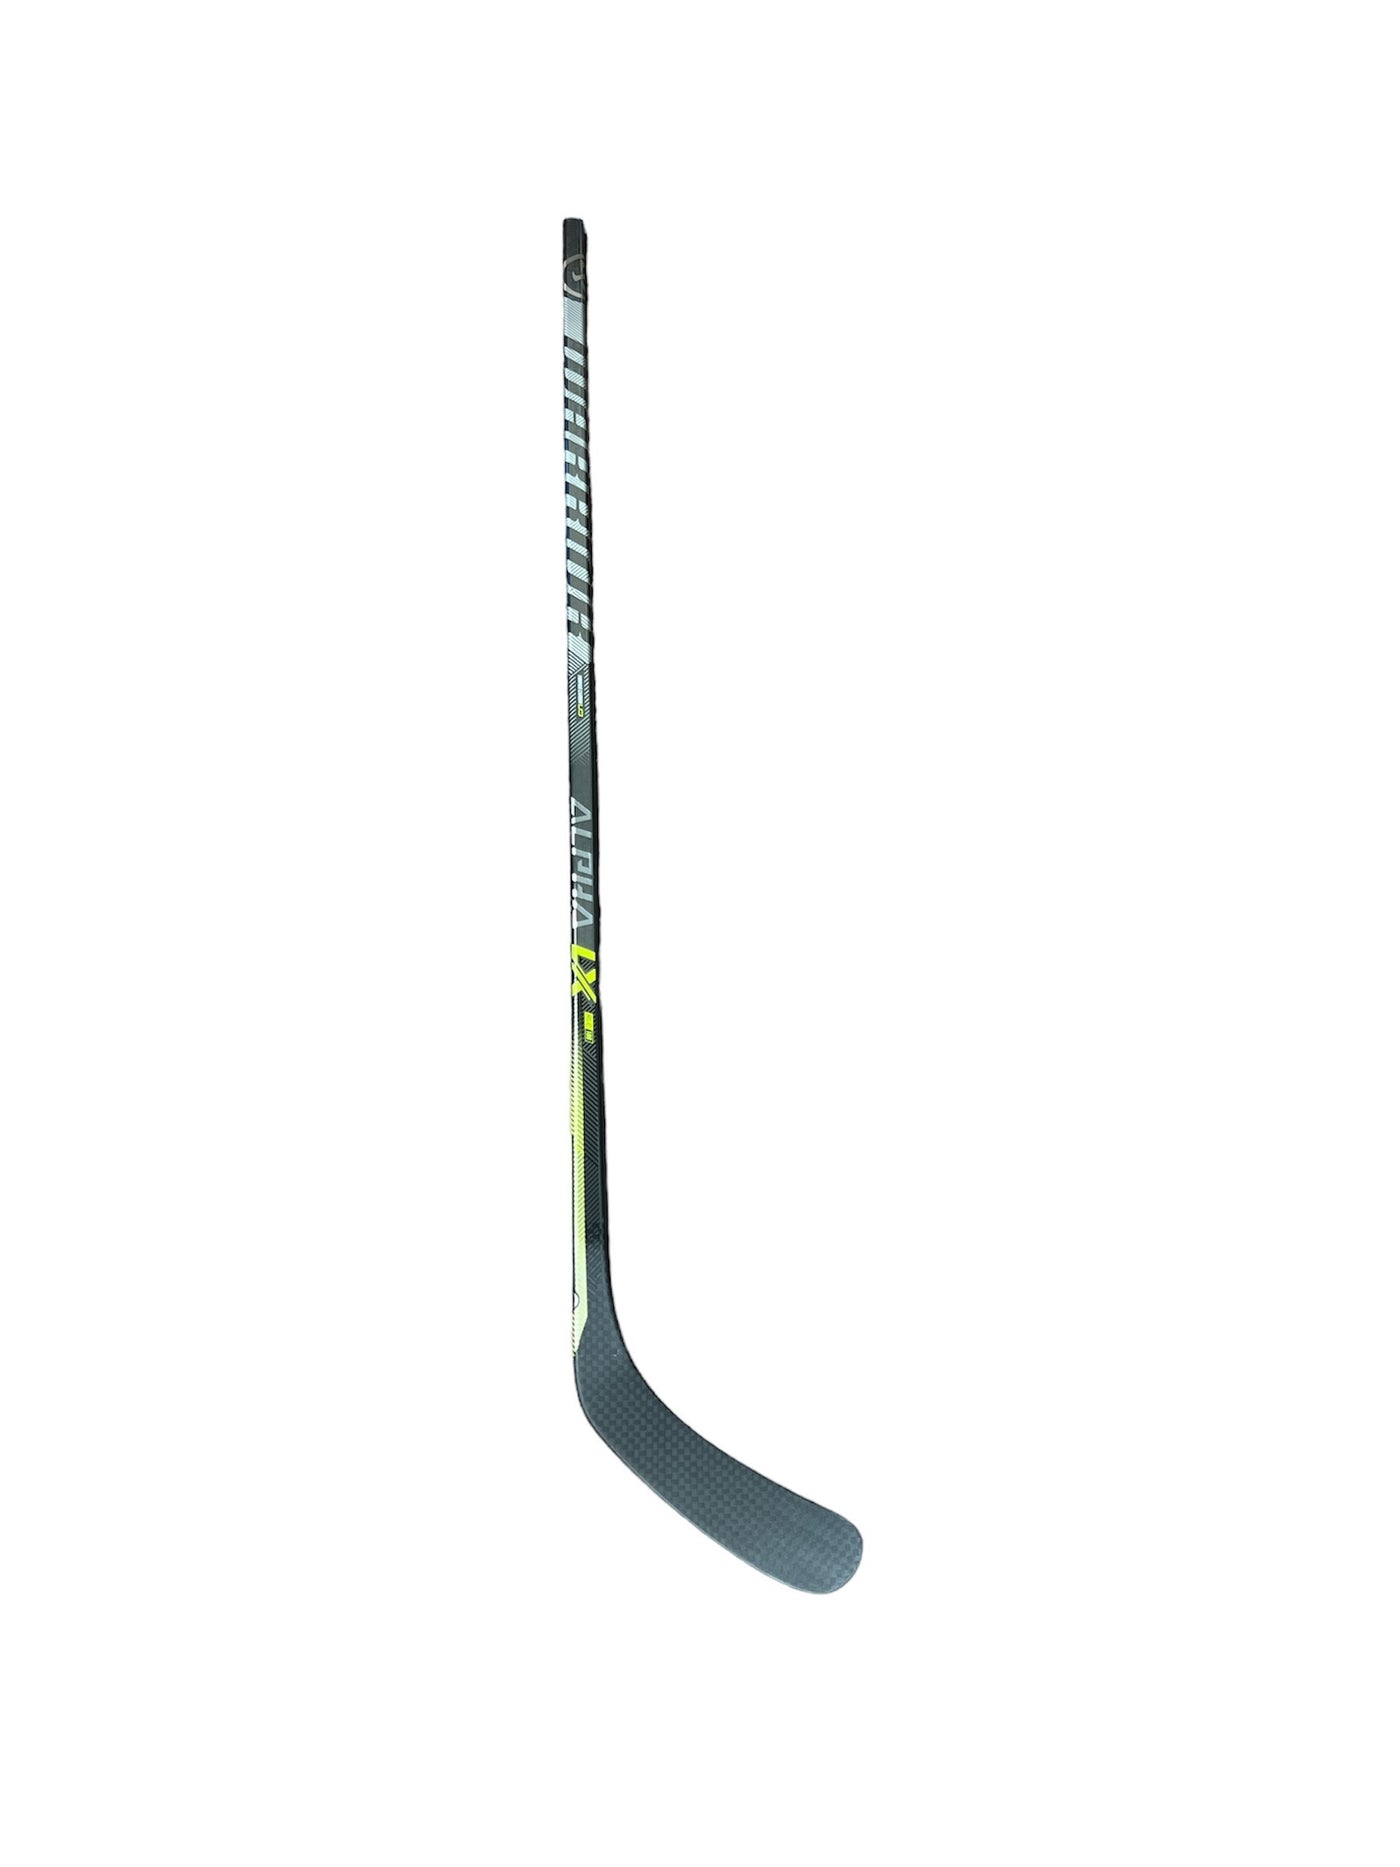 STUDENIC NEW WARRIOR TEAM ISSUED STICK - View of stick